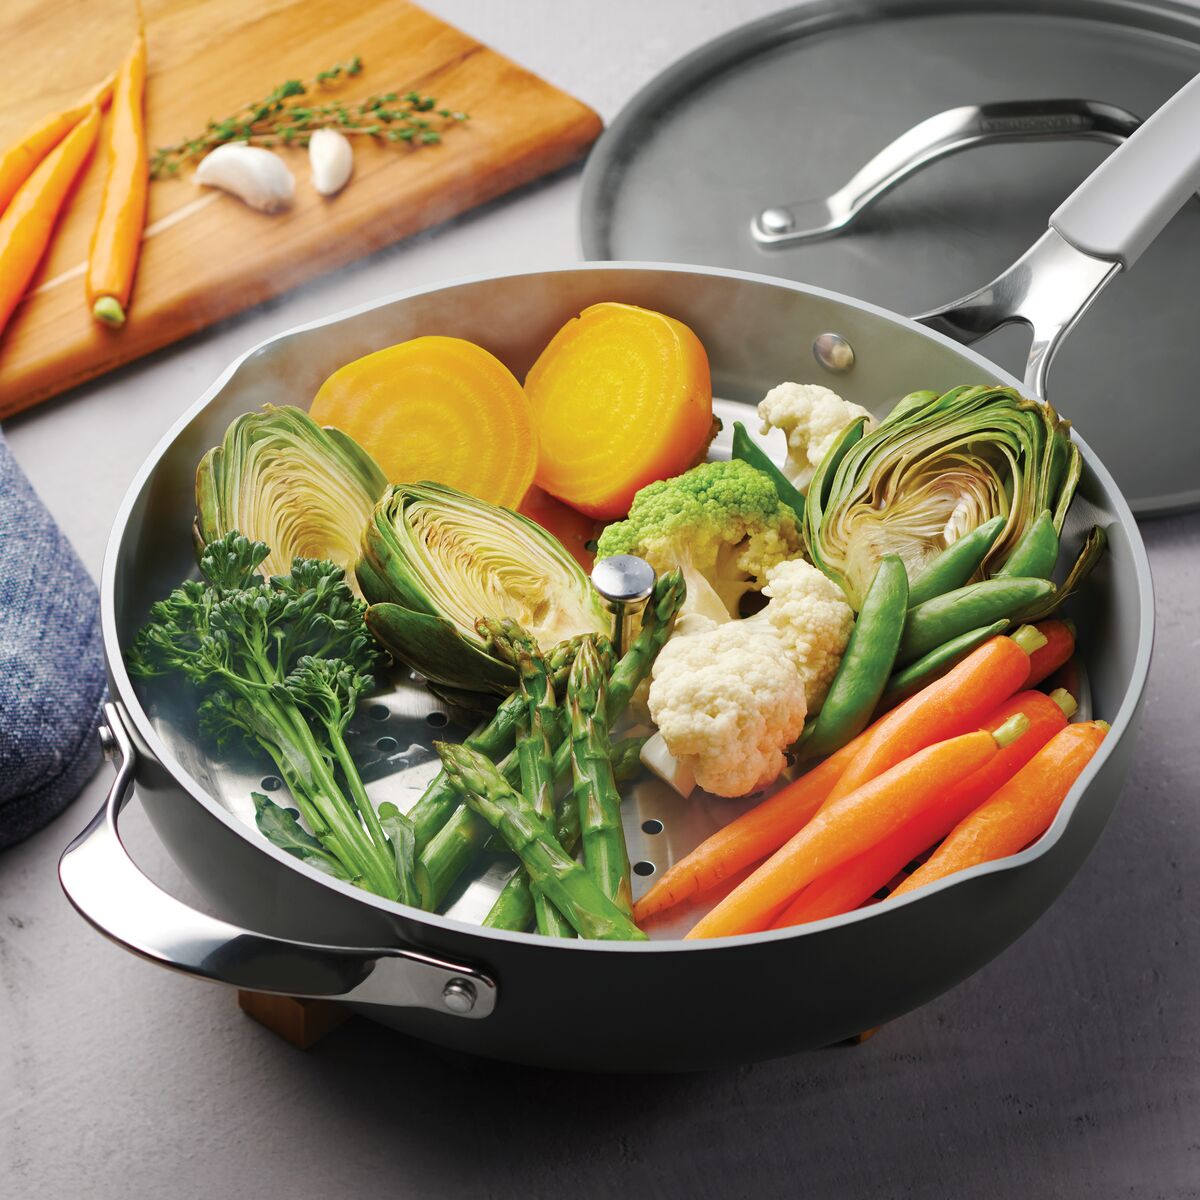 All in One Plus Pan, 5 qt Ceramic Non Stick - Charcoal Gray